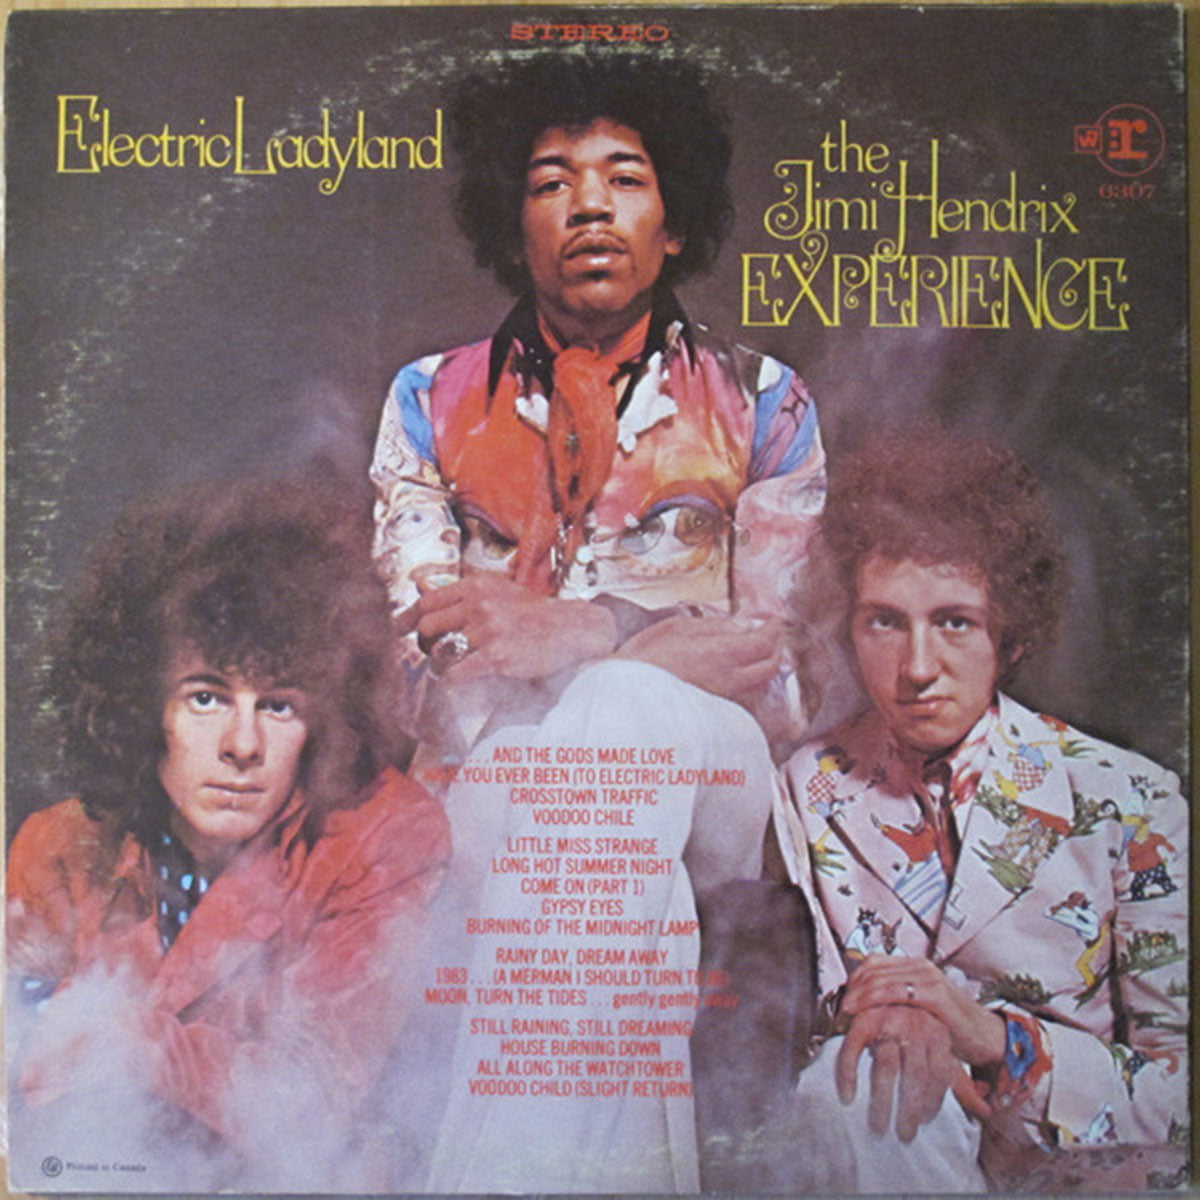 The Jimi Hendrix Experience – Electric Ladyland - Rare